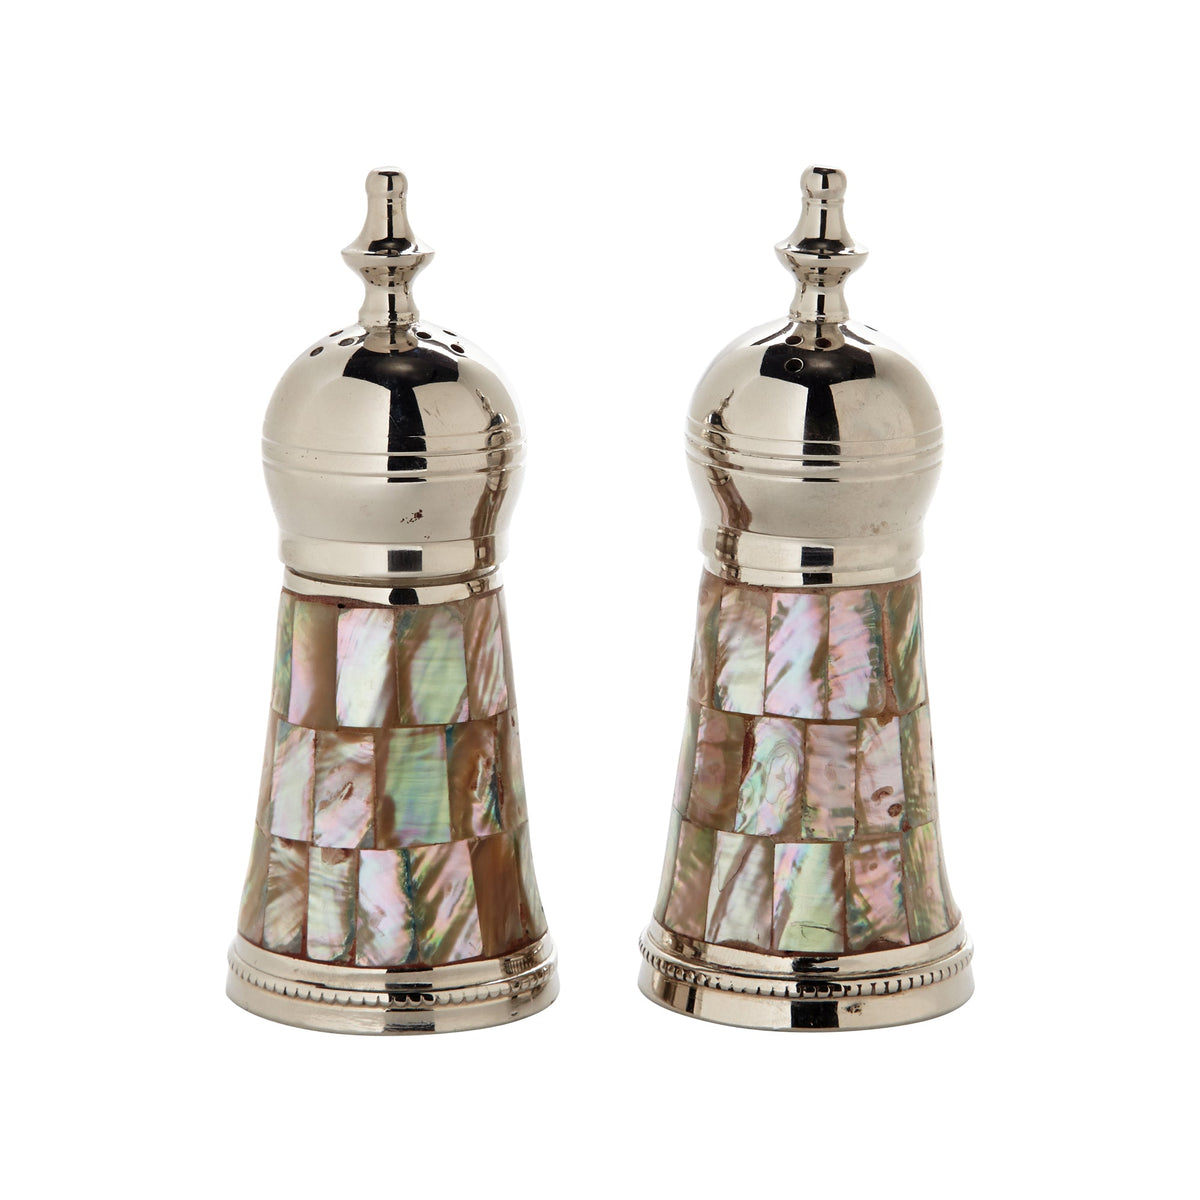 Salt and Pepper Shaker with Mother of Pearl